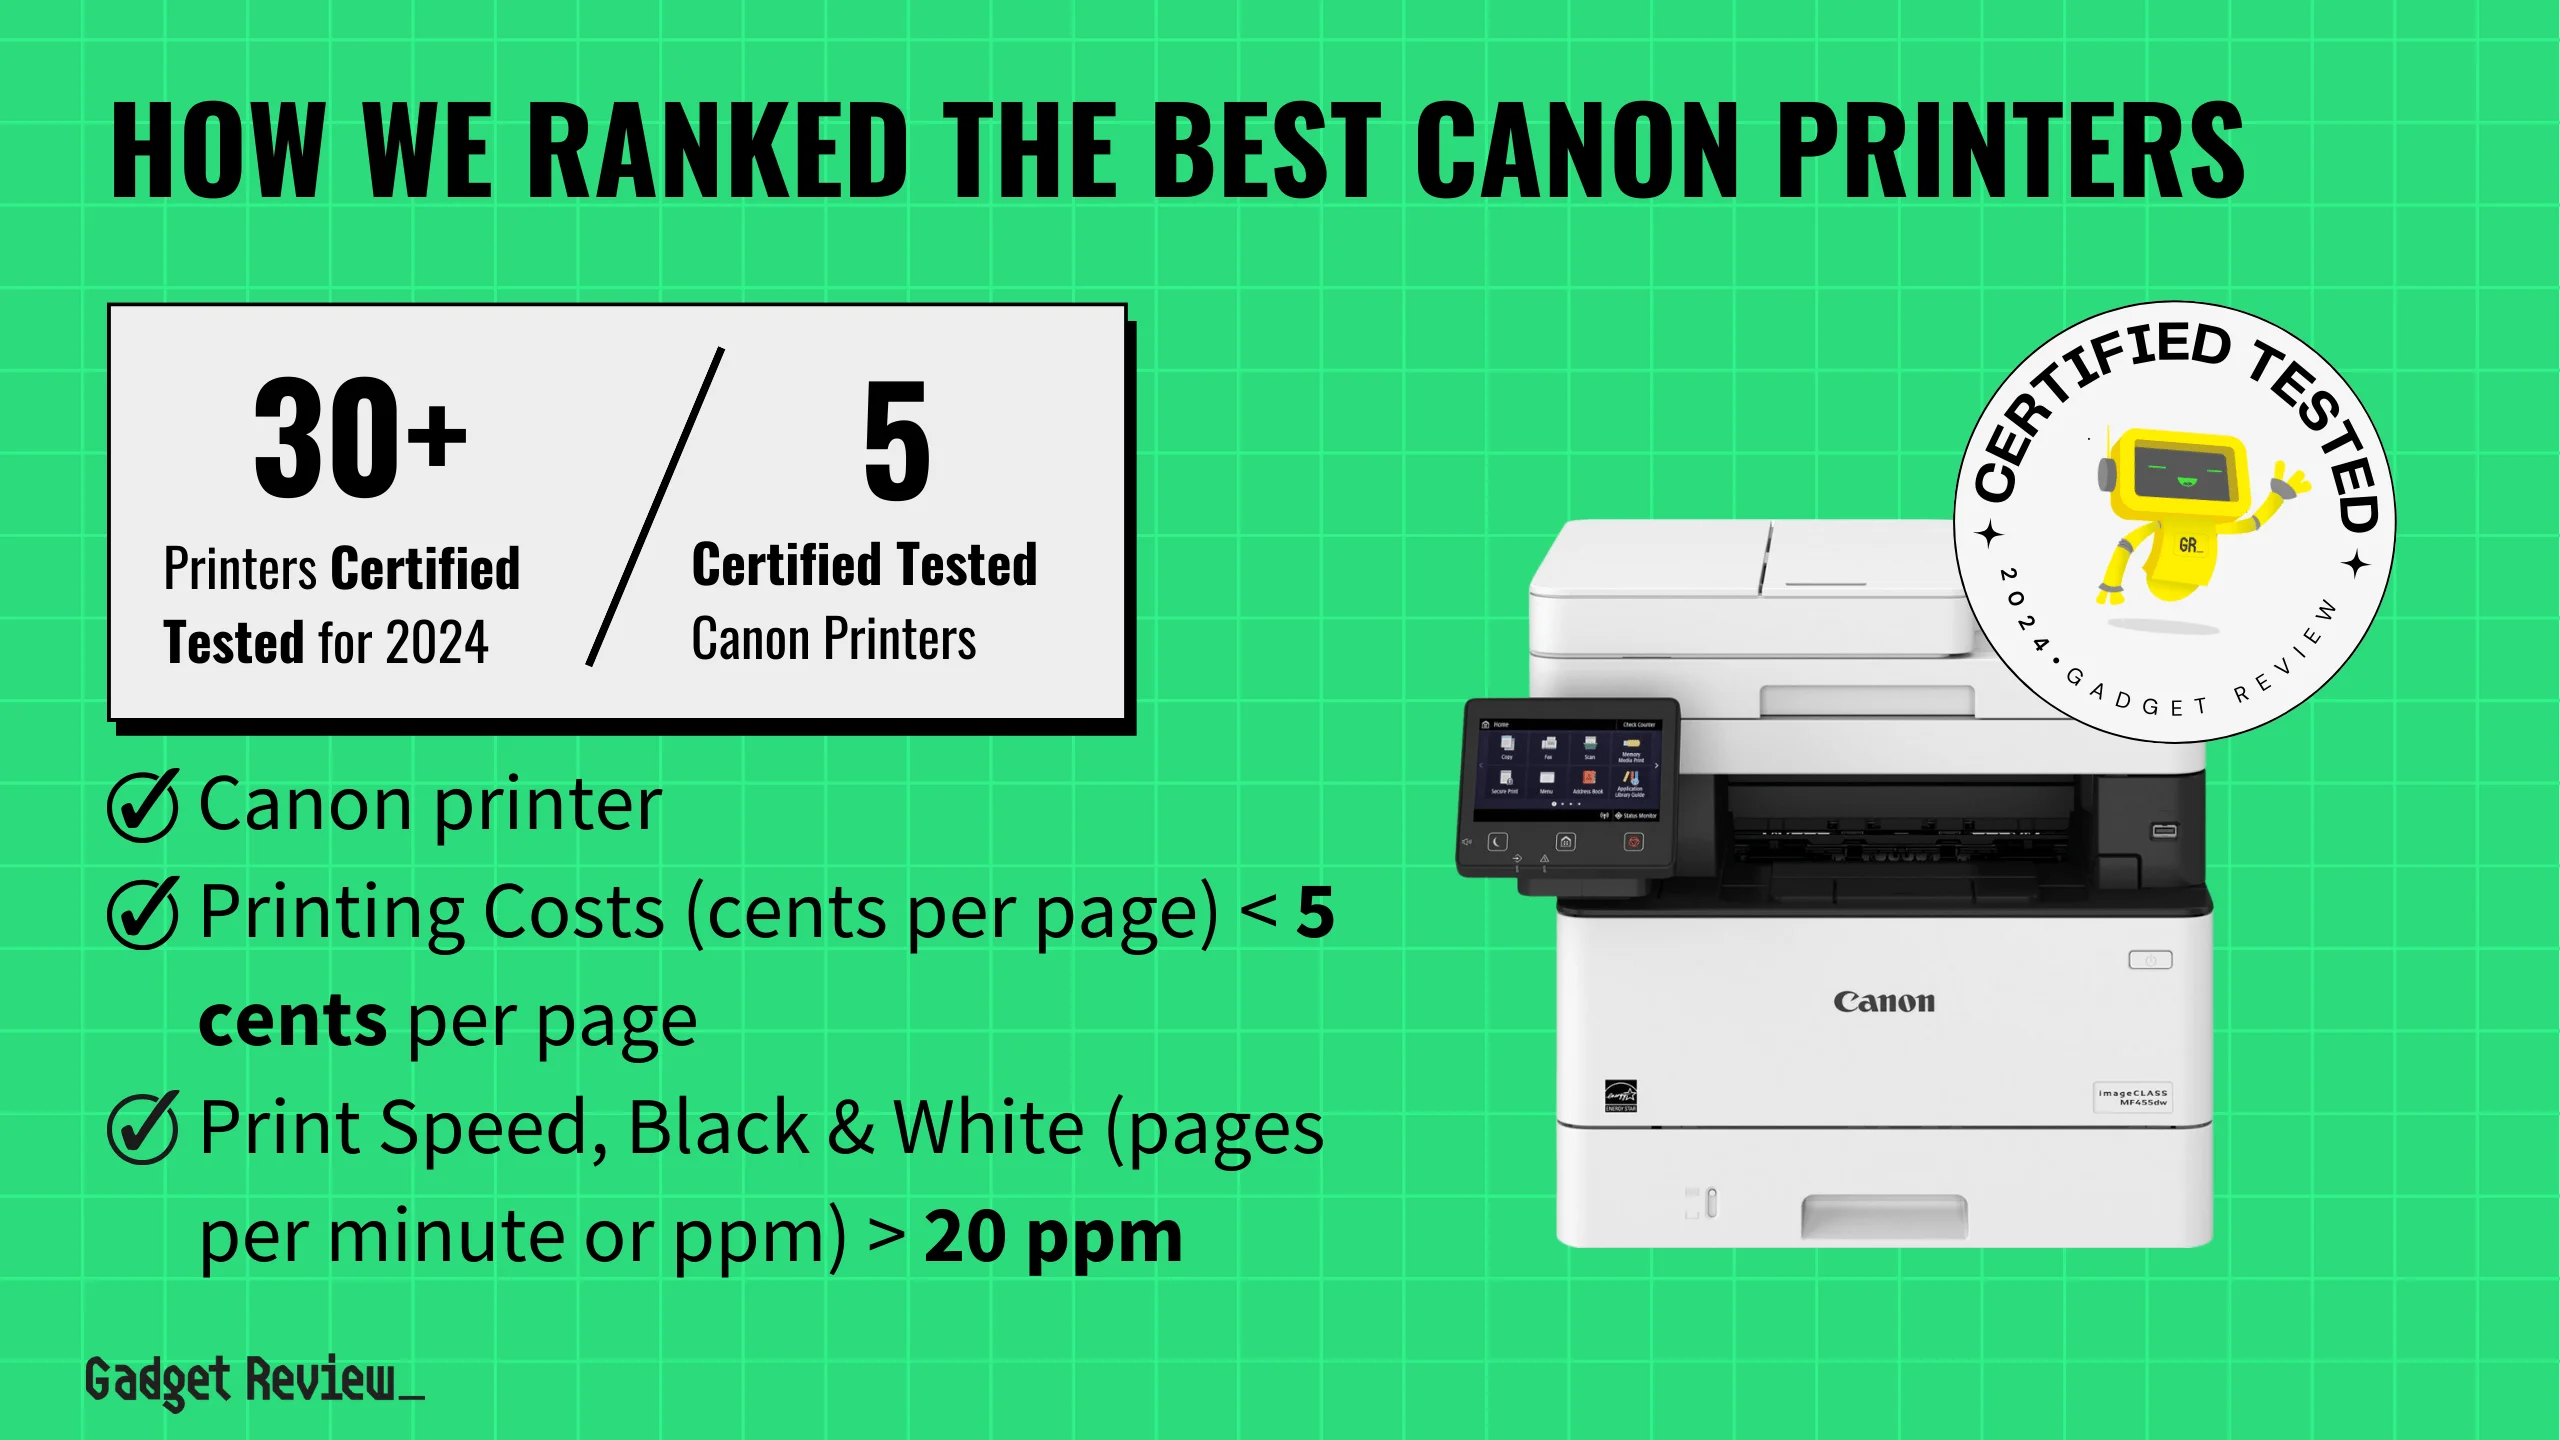 What’s the Best Canon Printer? 5 Options Ranked